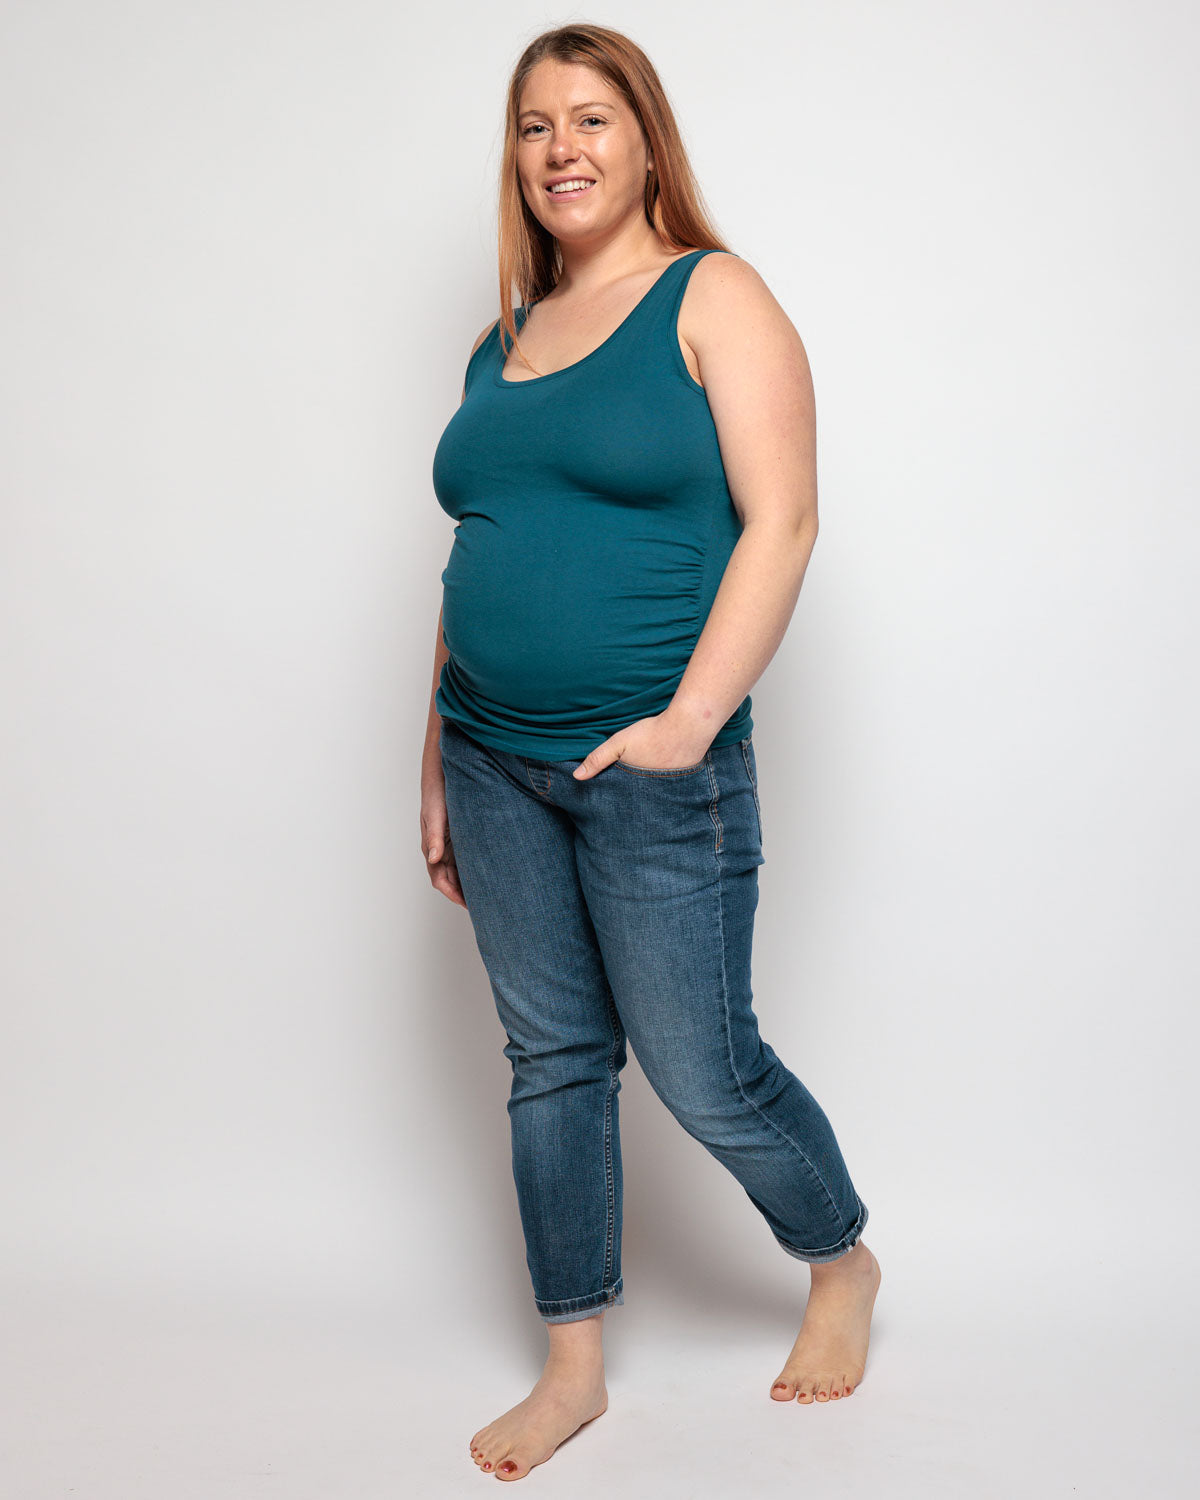 Maternity Vest Top in Teal Organic Cotton for pregnancy